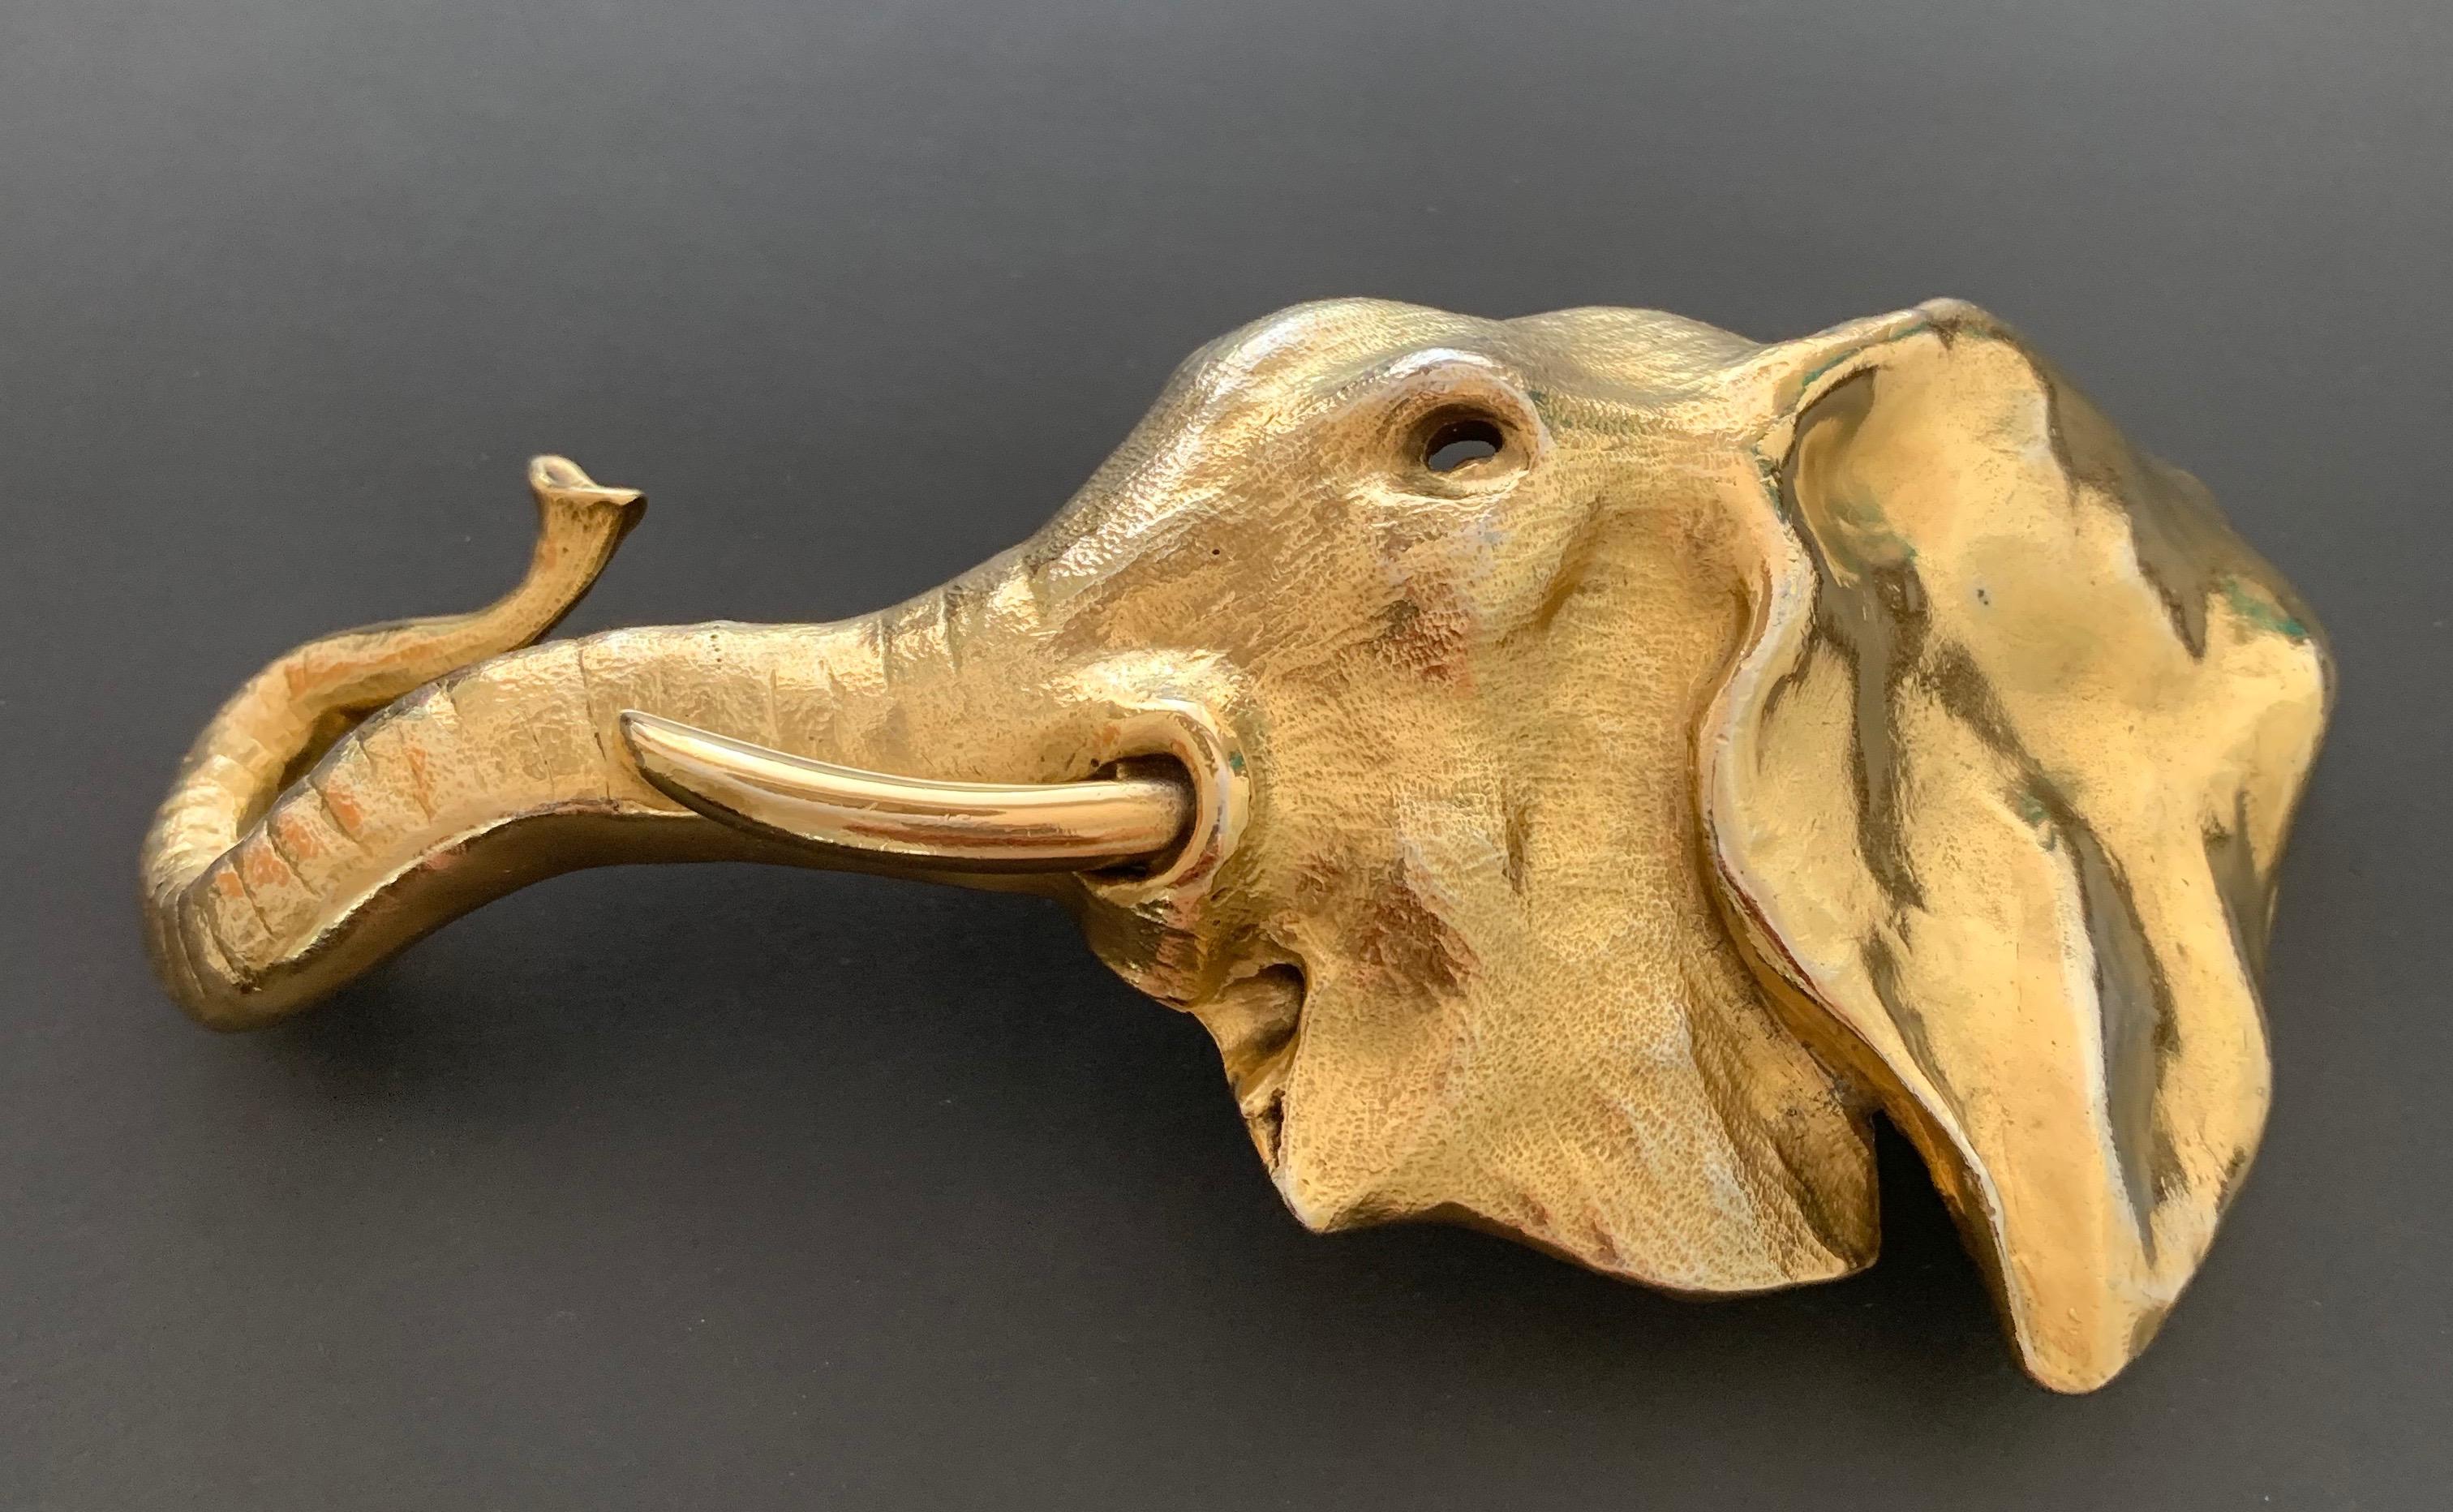 Christopher Ross 1980 gold elephant buckle.
All you need is a gorgeous belt strap and off you go being the most stylish woman / man on the planet.  This is one elephant poachers aren't going to like !
6. 1/4